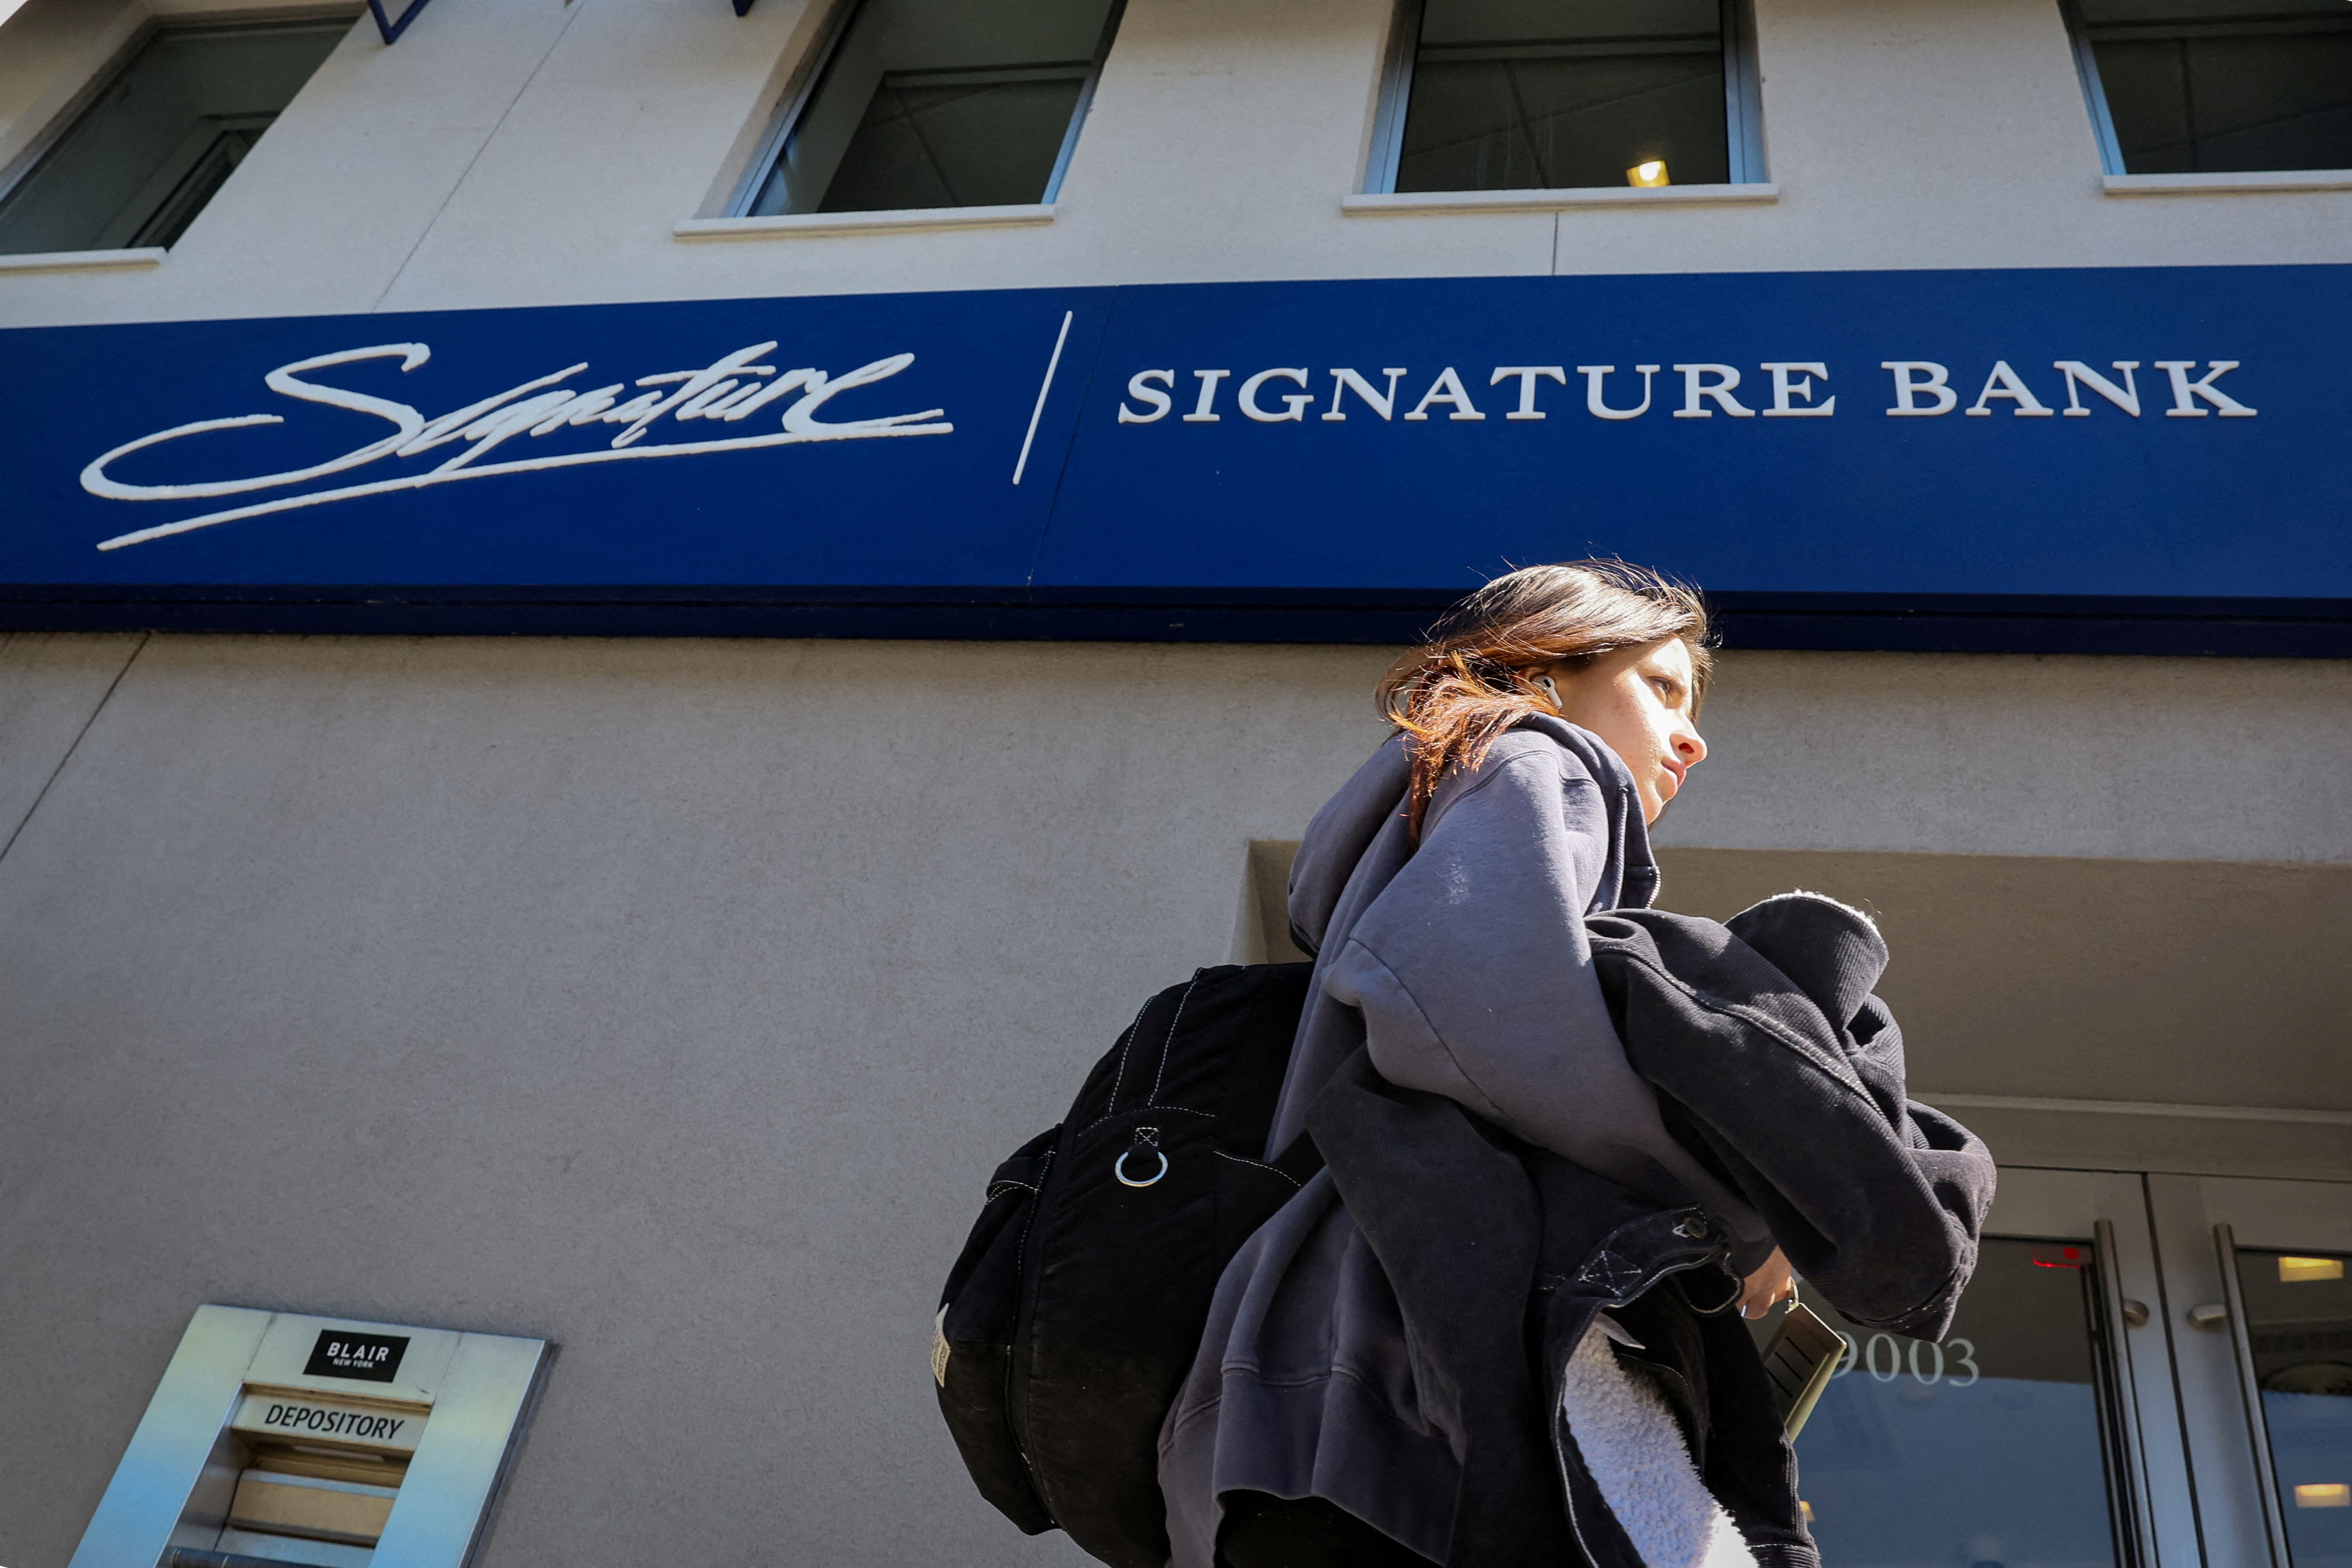 A woman walks past a Signature Bank location in Brooklyn, New York